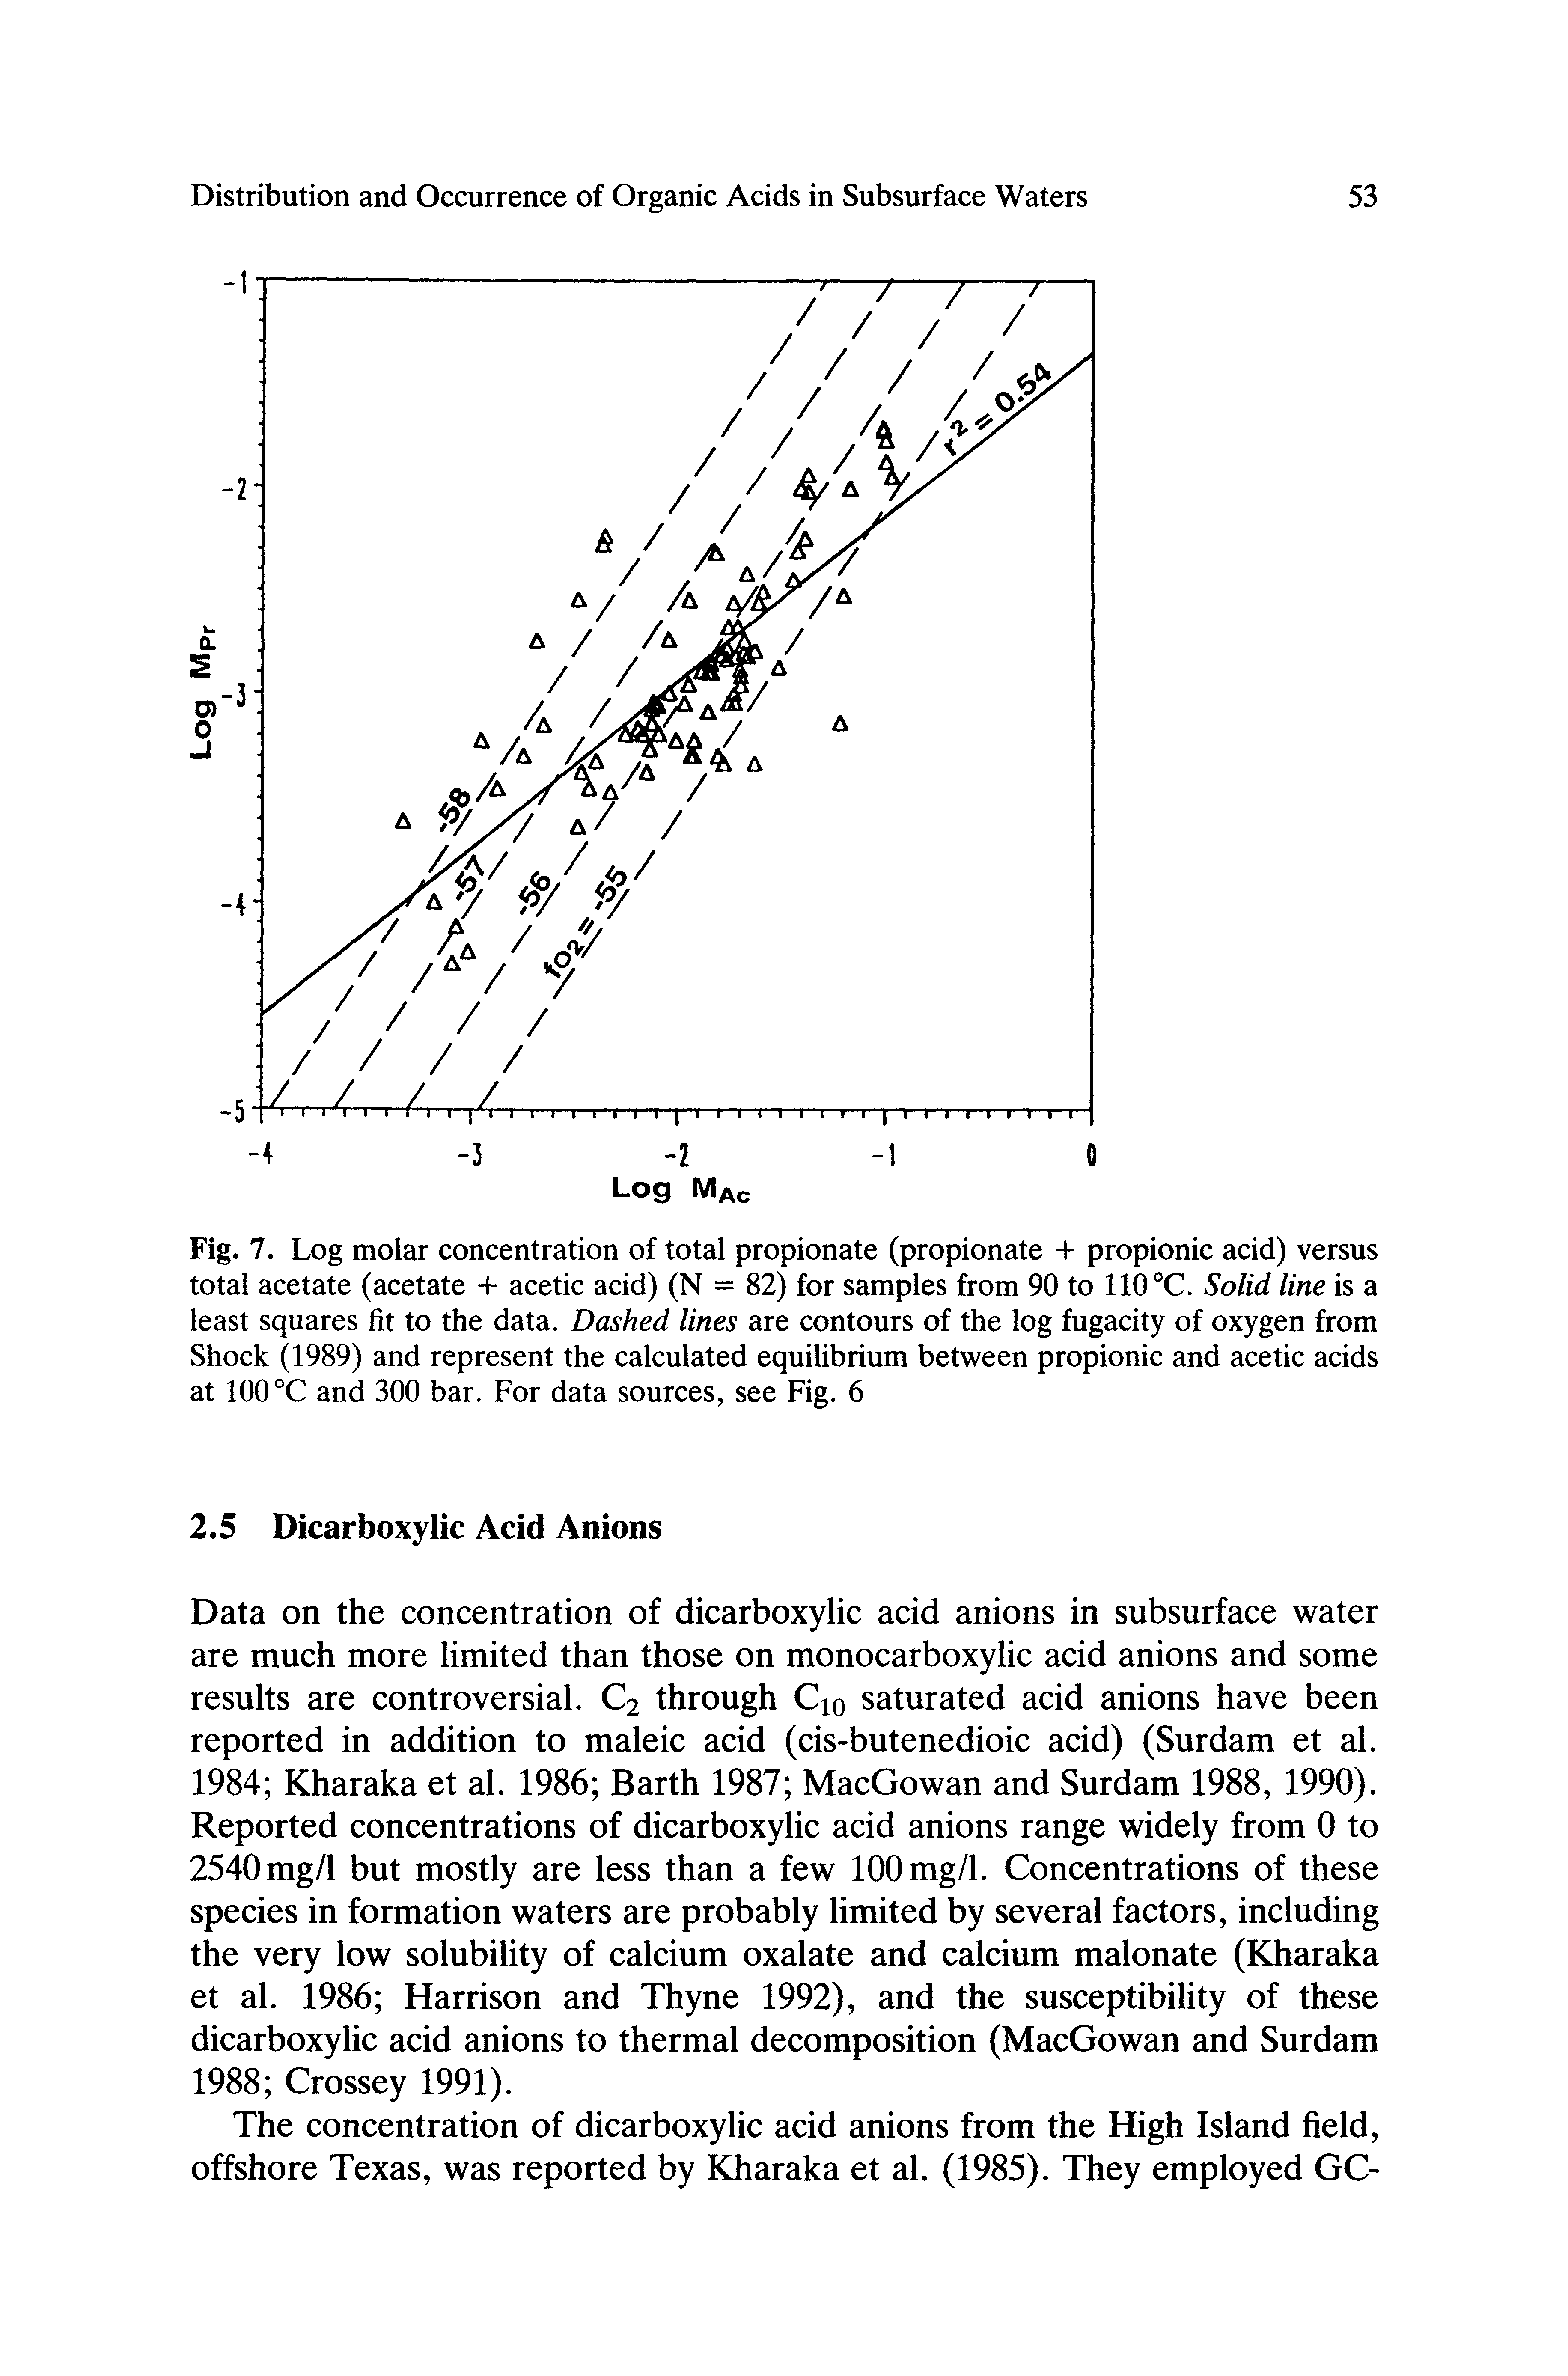 Fig. 7. Log molar concentration of total propionate (propionate + propionic acid) versus total acetate (acetate + acetic acid) (N = 82) for samples from 90 to 110°C. Solid line is a least squares fit to the data. Dashed lines are contours of the log fugacity of oxygen from Shock (1989) and represent the calculated equilibrium between propionic and acetic acids at 100 °C and 300 bar. For data sources, see Fig. 6...